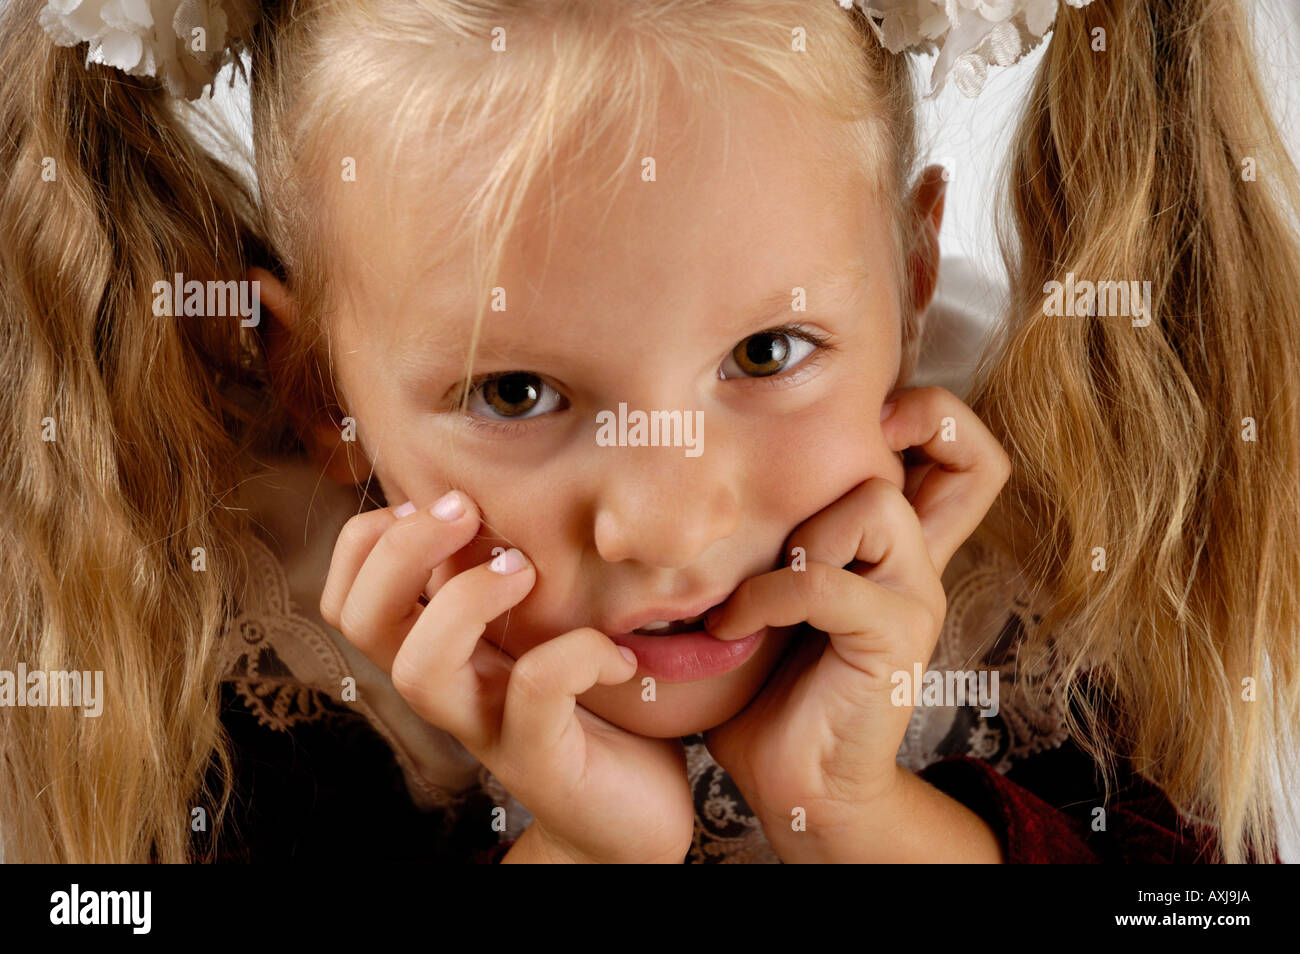 Funny little girl expressive close up portrait Stock Photo